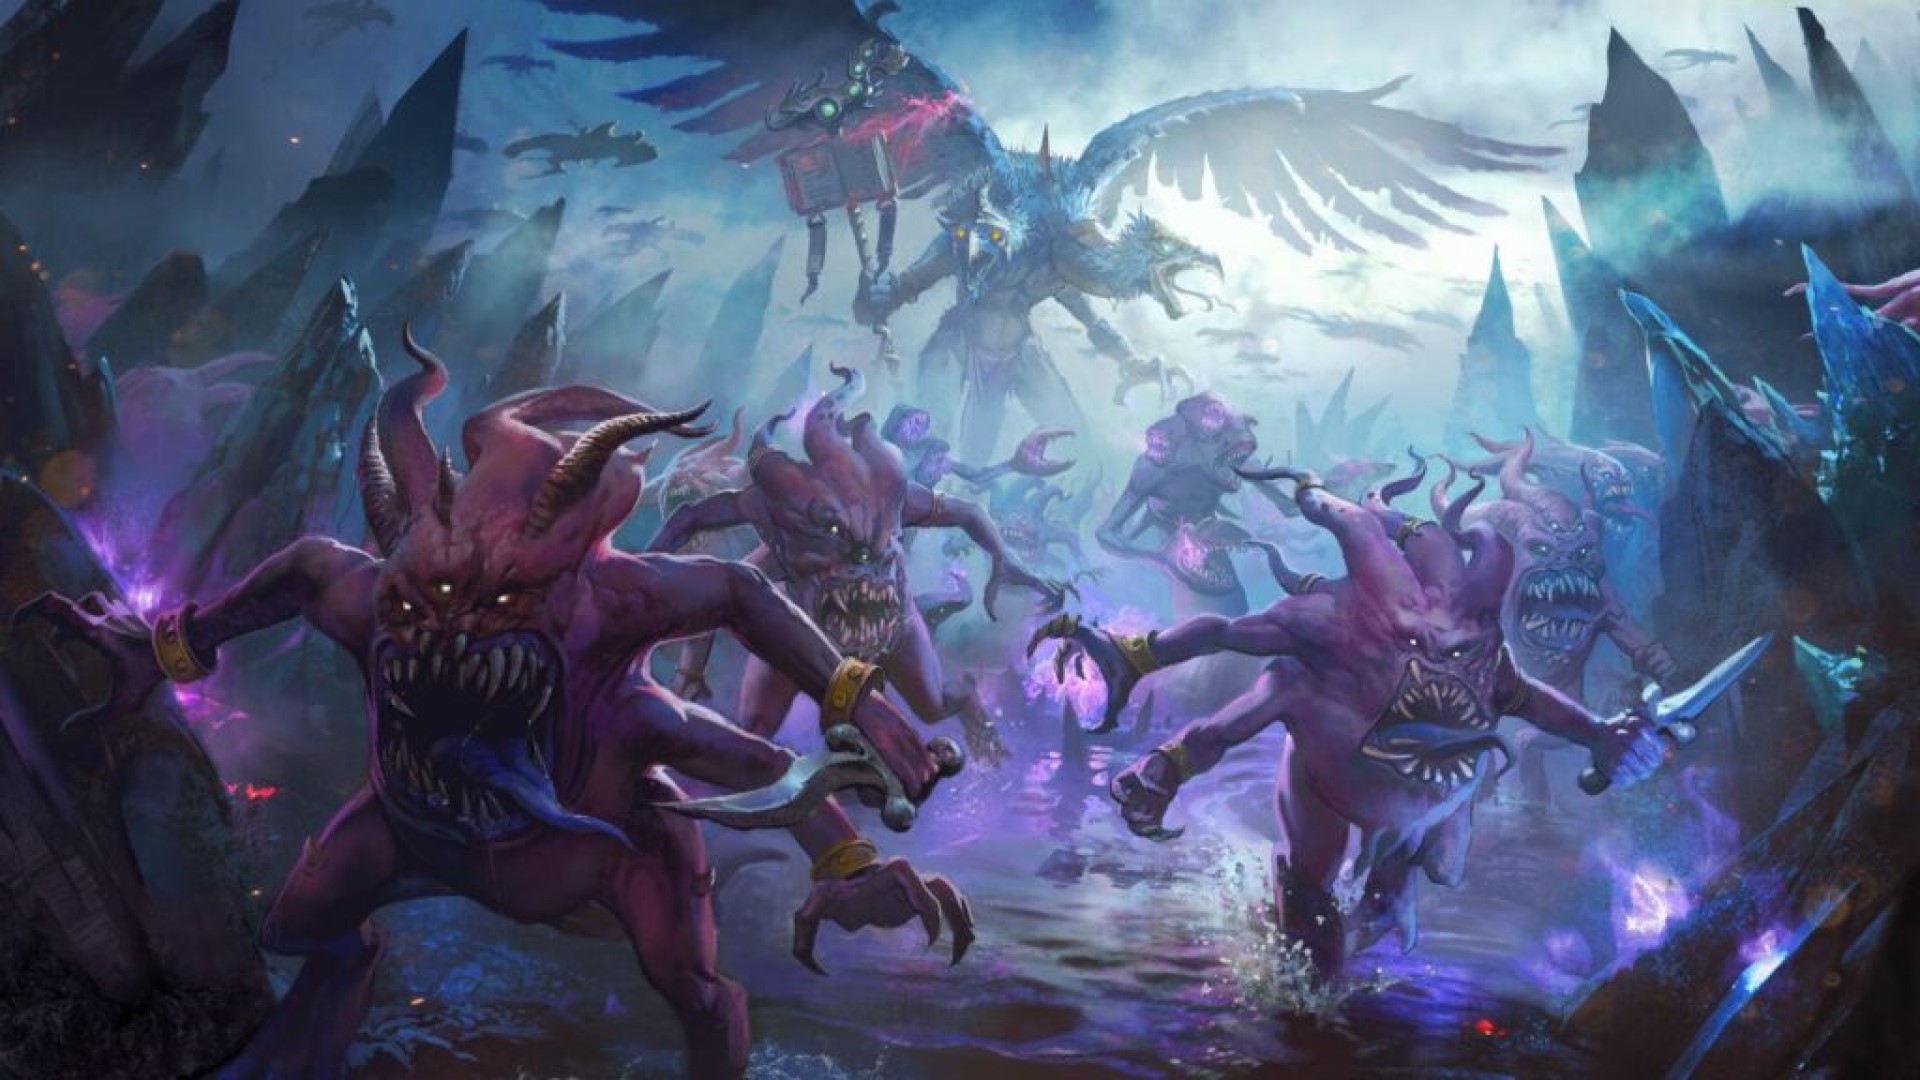 Total Warhammer 3’s Tzeentch army roster is full of gibbering, mouthy horrors